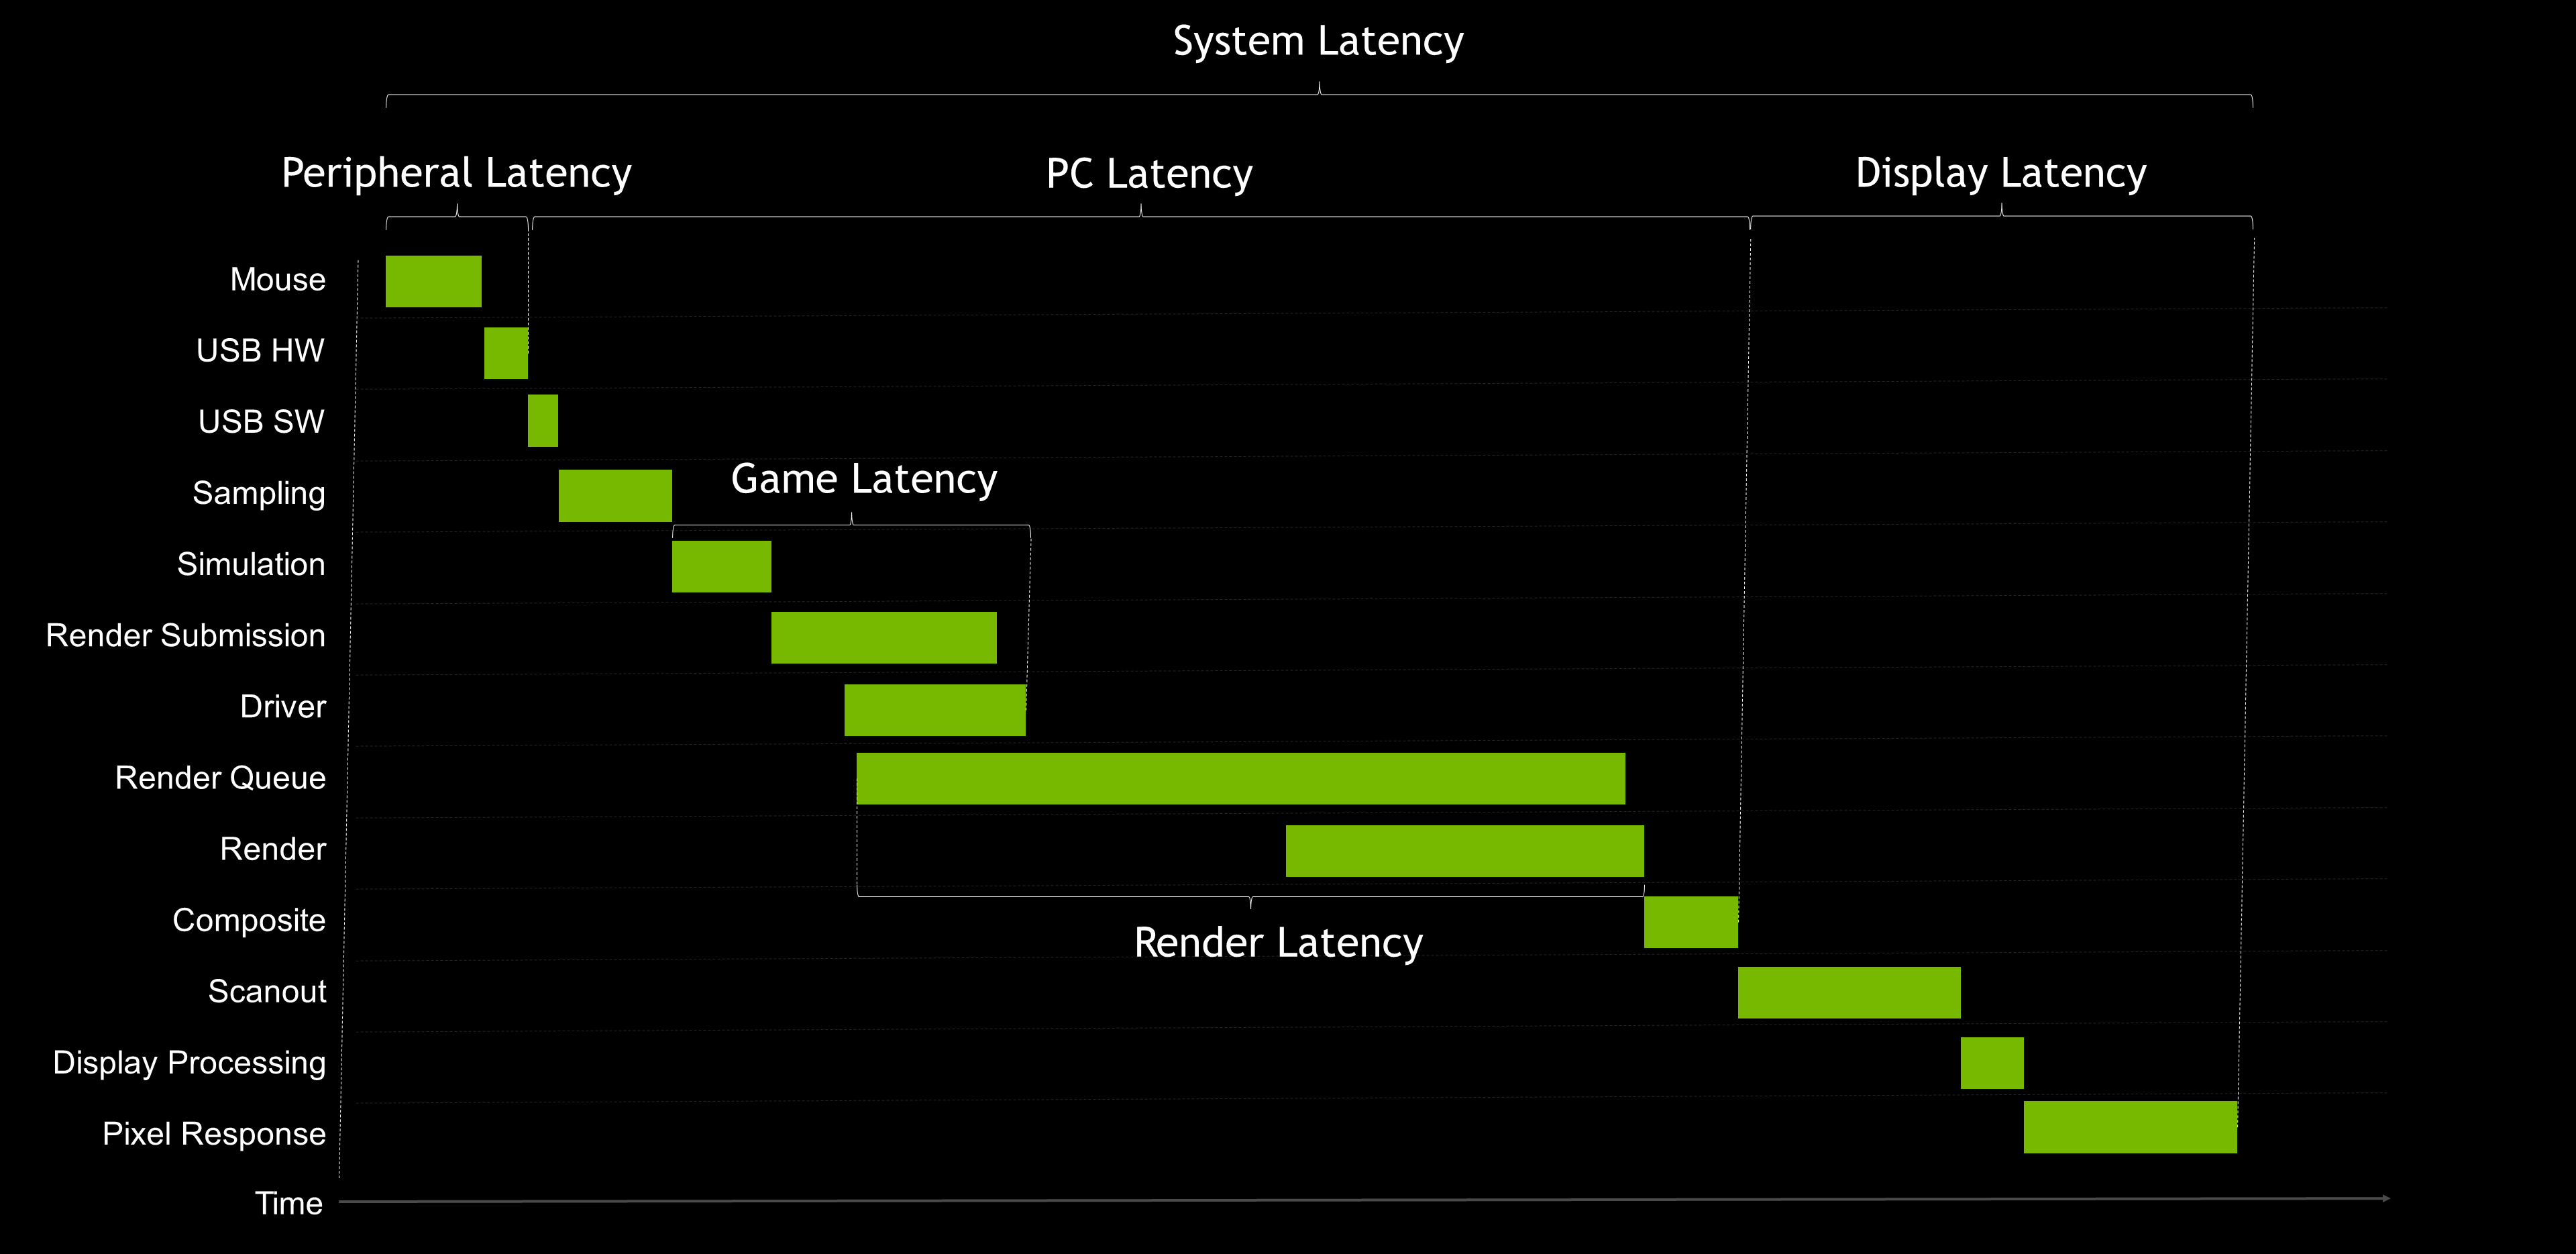 How To Reduce Lag - A Guide To Better System Latency